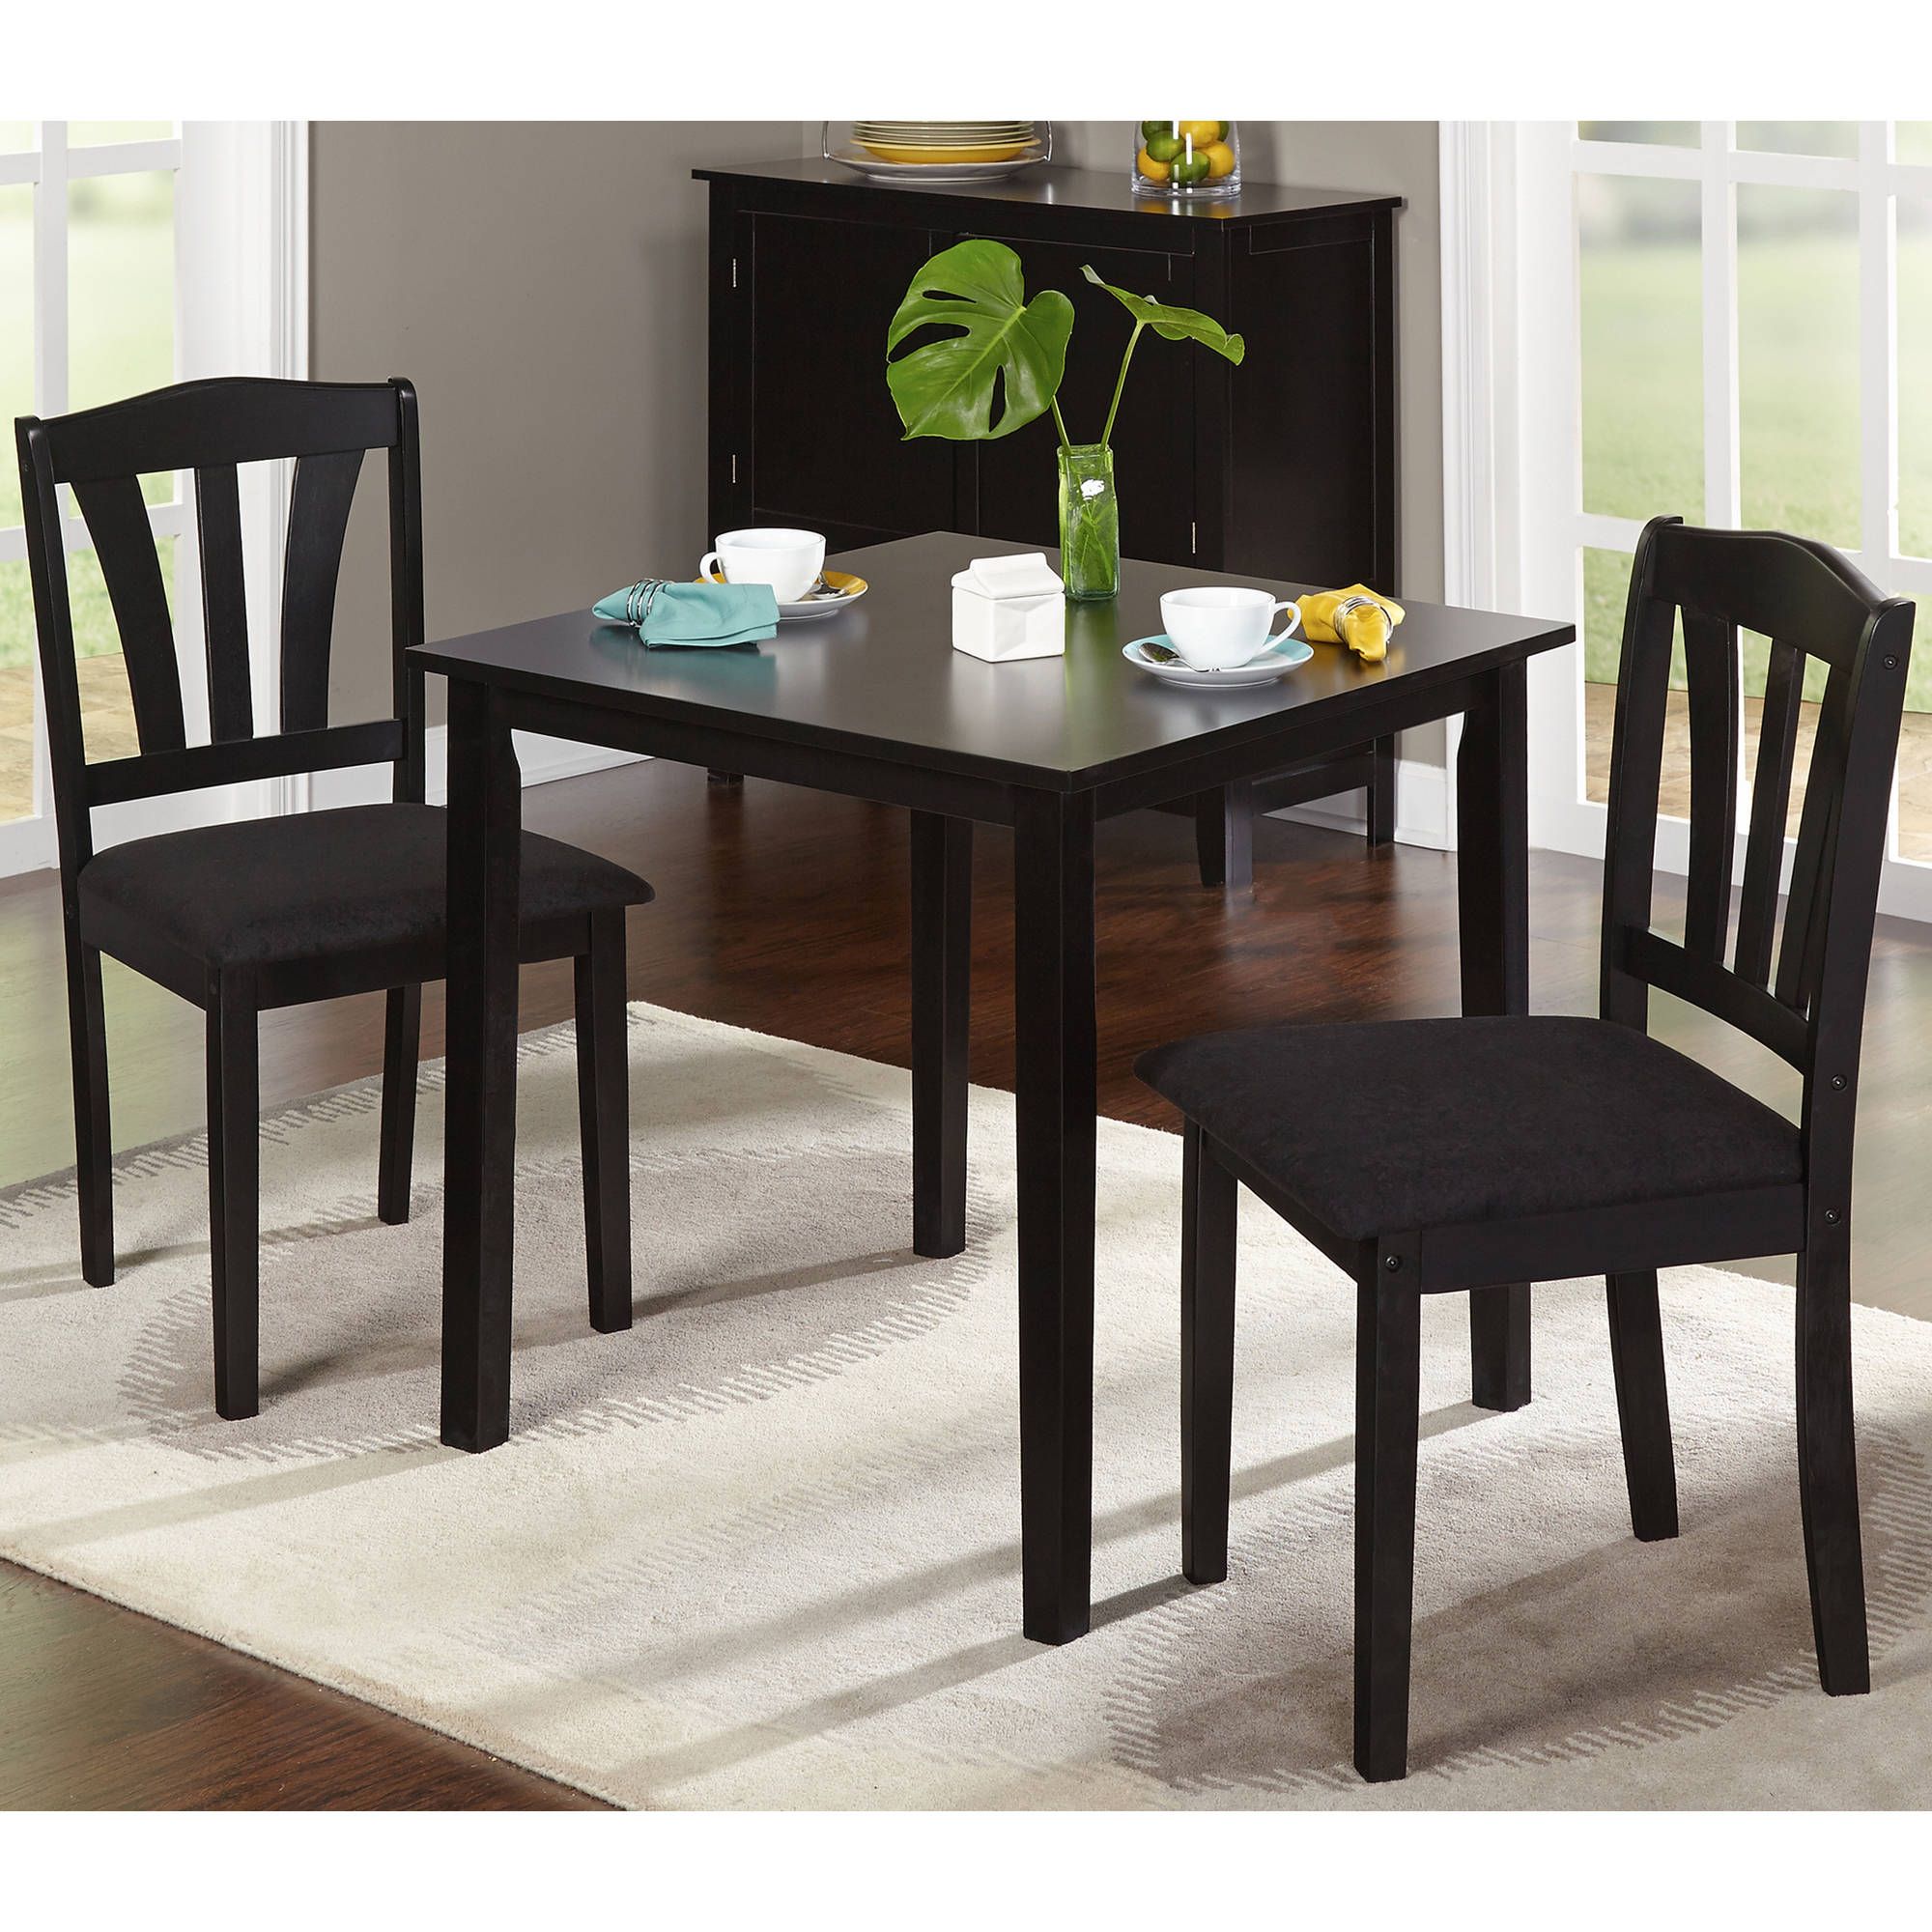 Metropolitan 3 Piece Dining Set Multiple Finishes Regarding Most Up To Date 3 Piece Dining Sets 